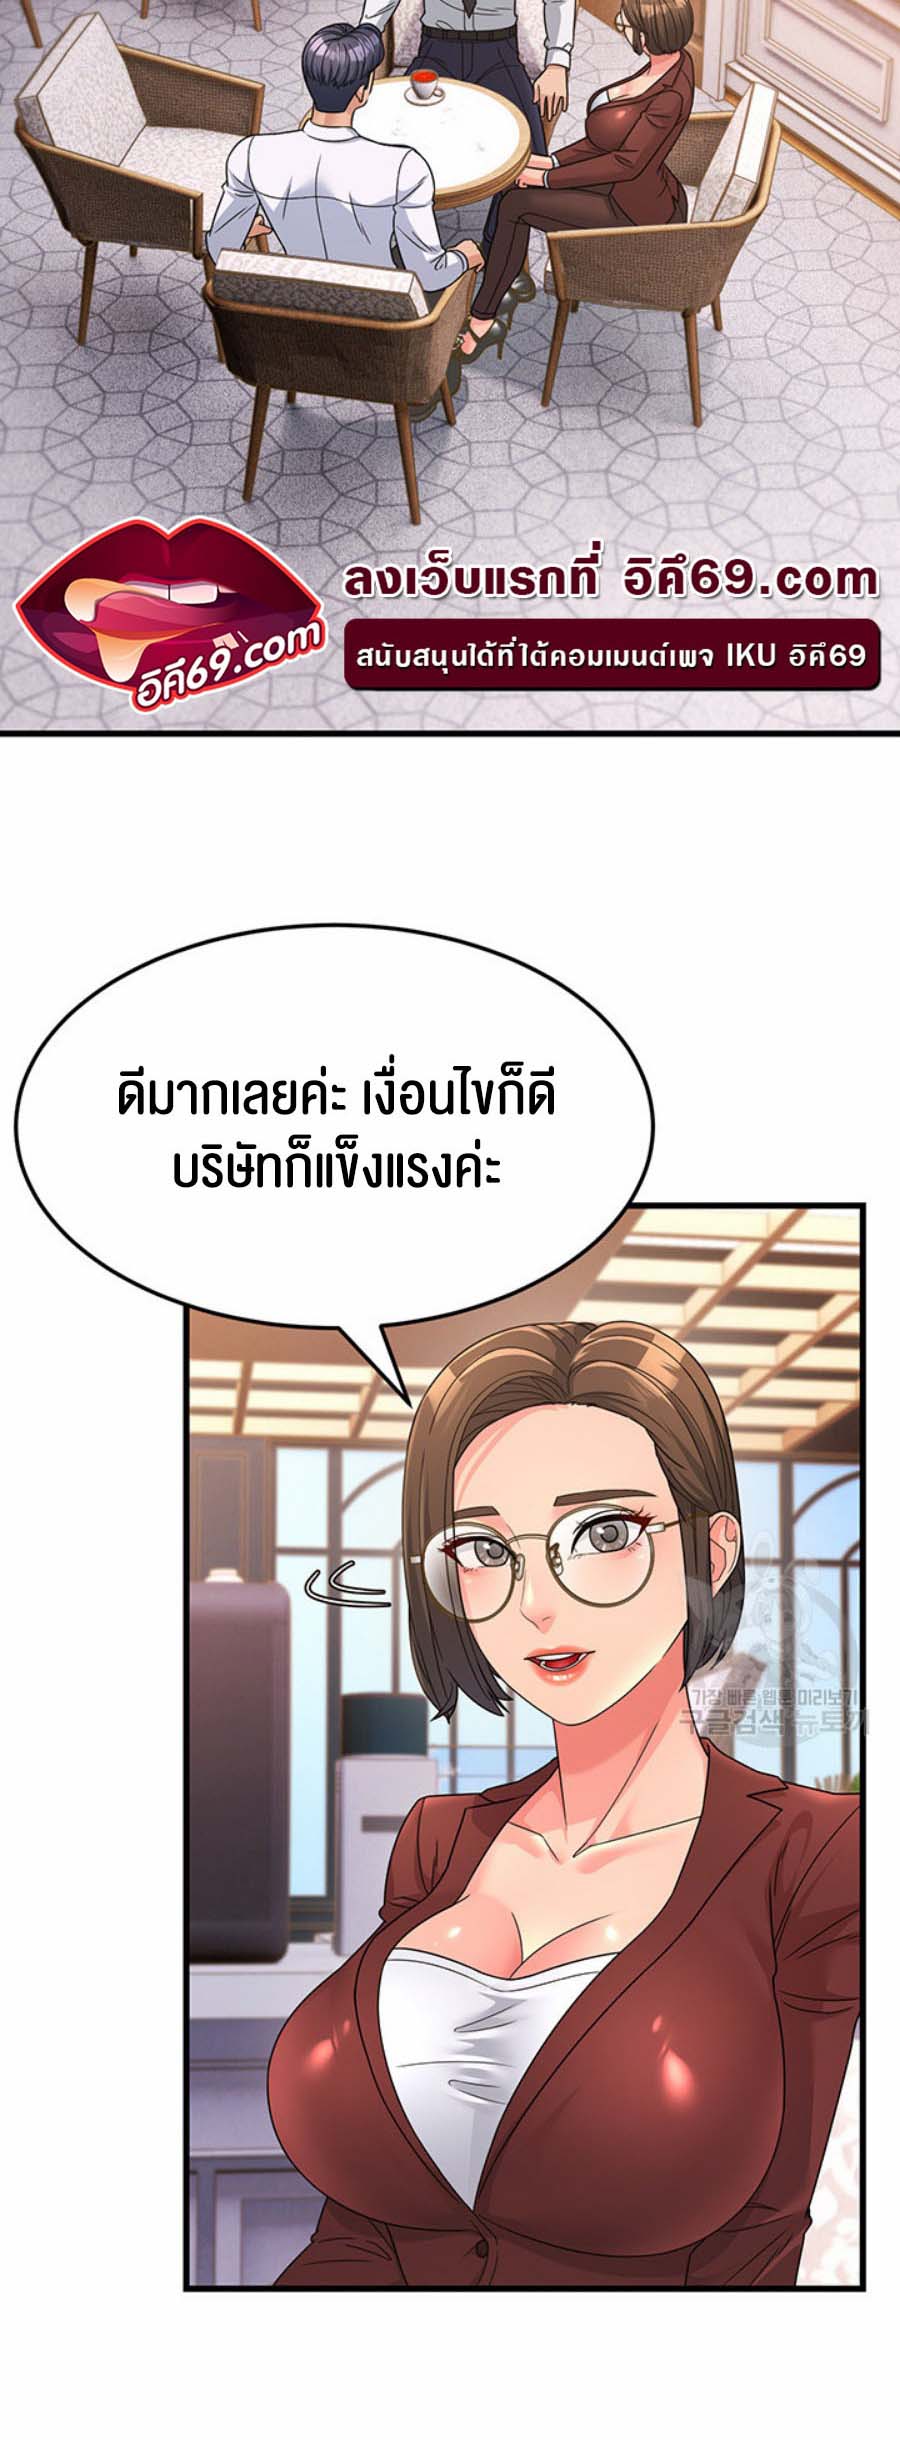 à¸­à¹ˆà¸²à¸™à¹‚à¸”à¸ˆà¸´à¸™ à¹€à¸£à¸·à¹ˆà¸­à¸‡ Mother in Law Bends To My Will 8 42